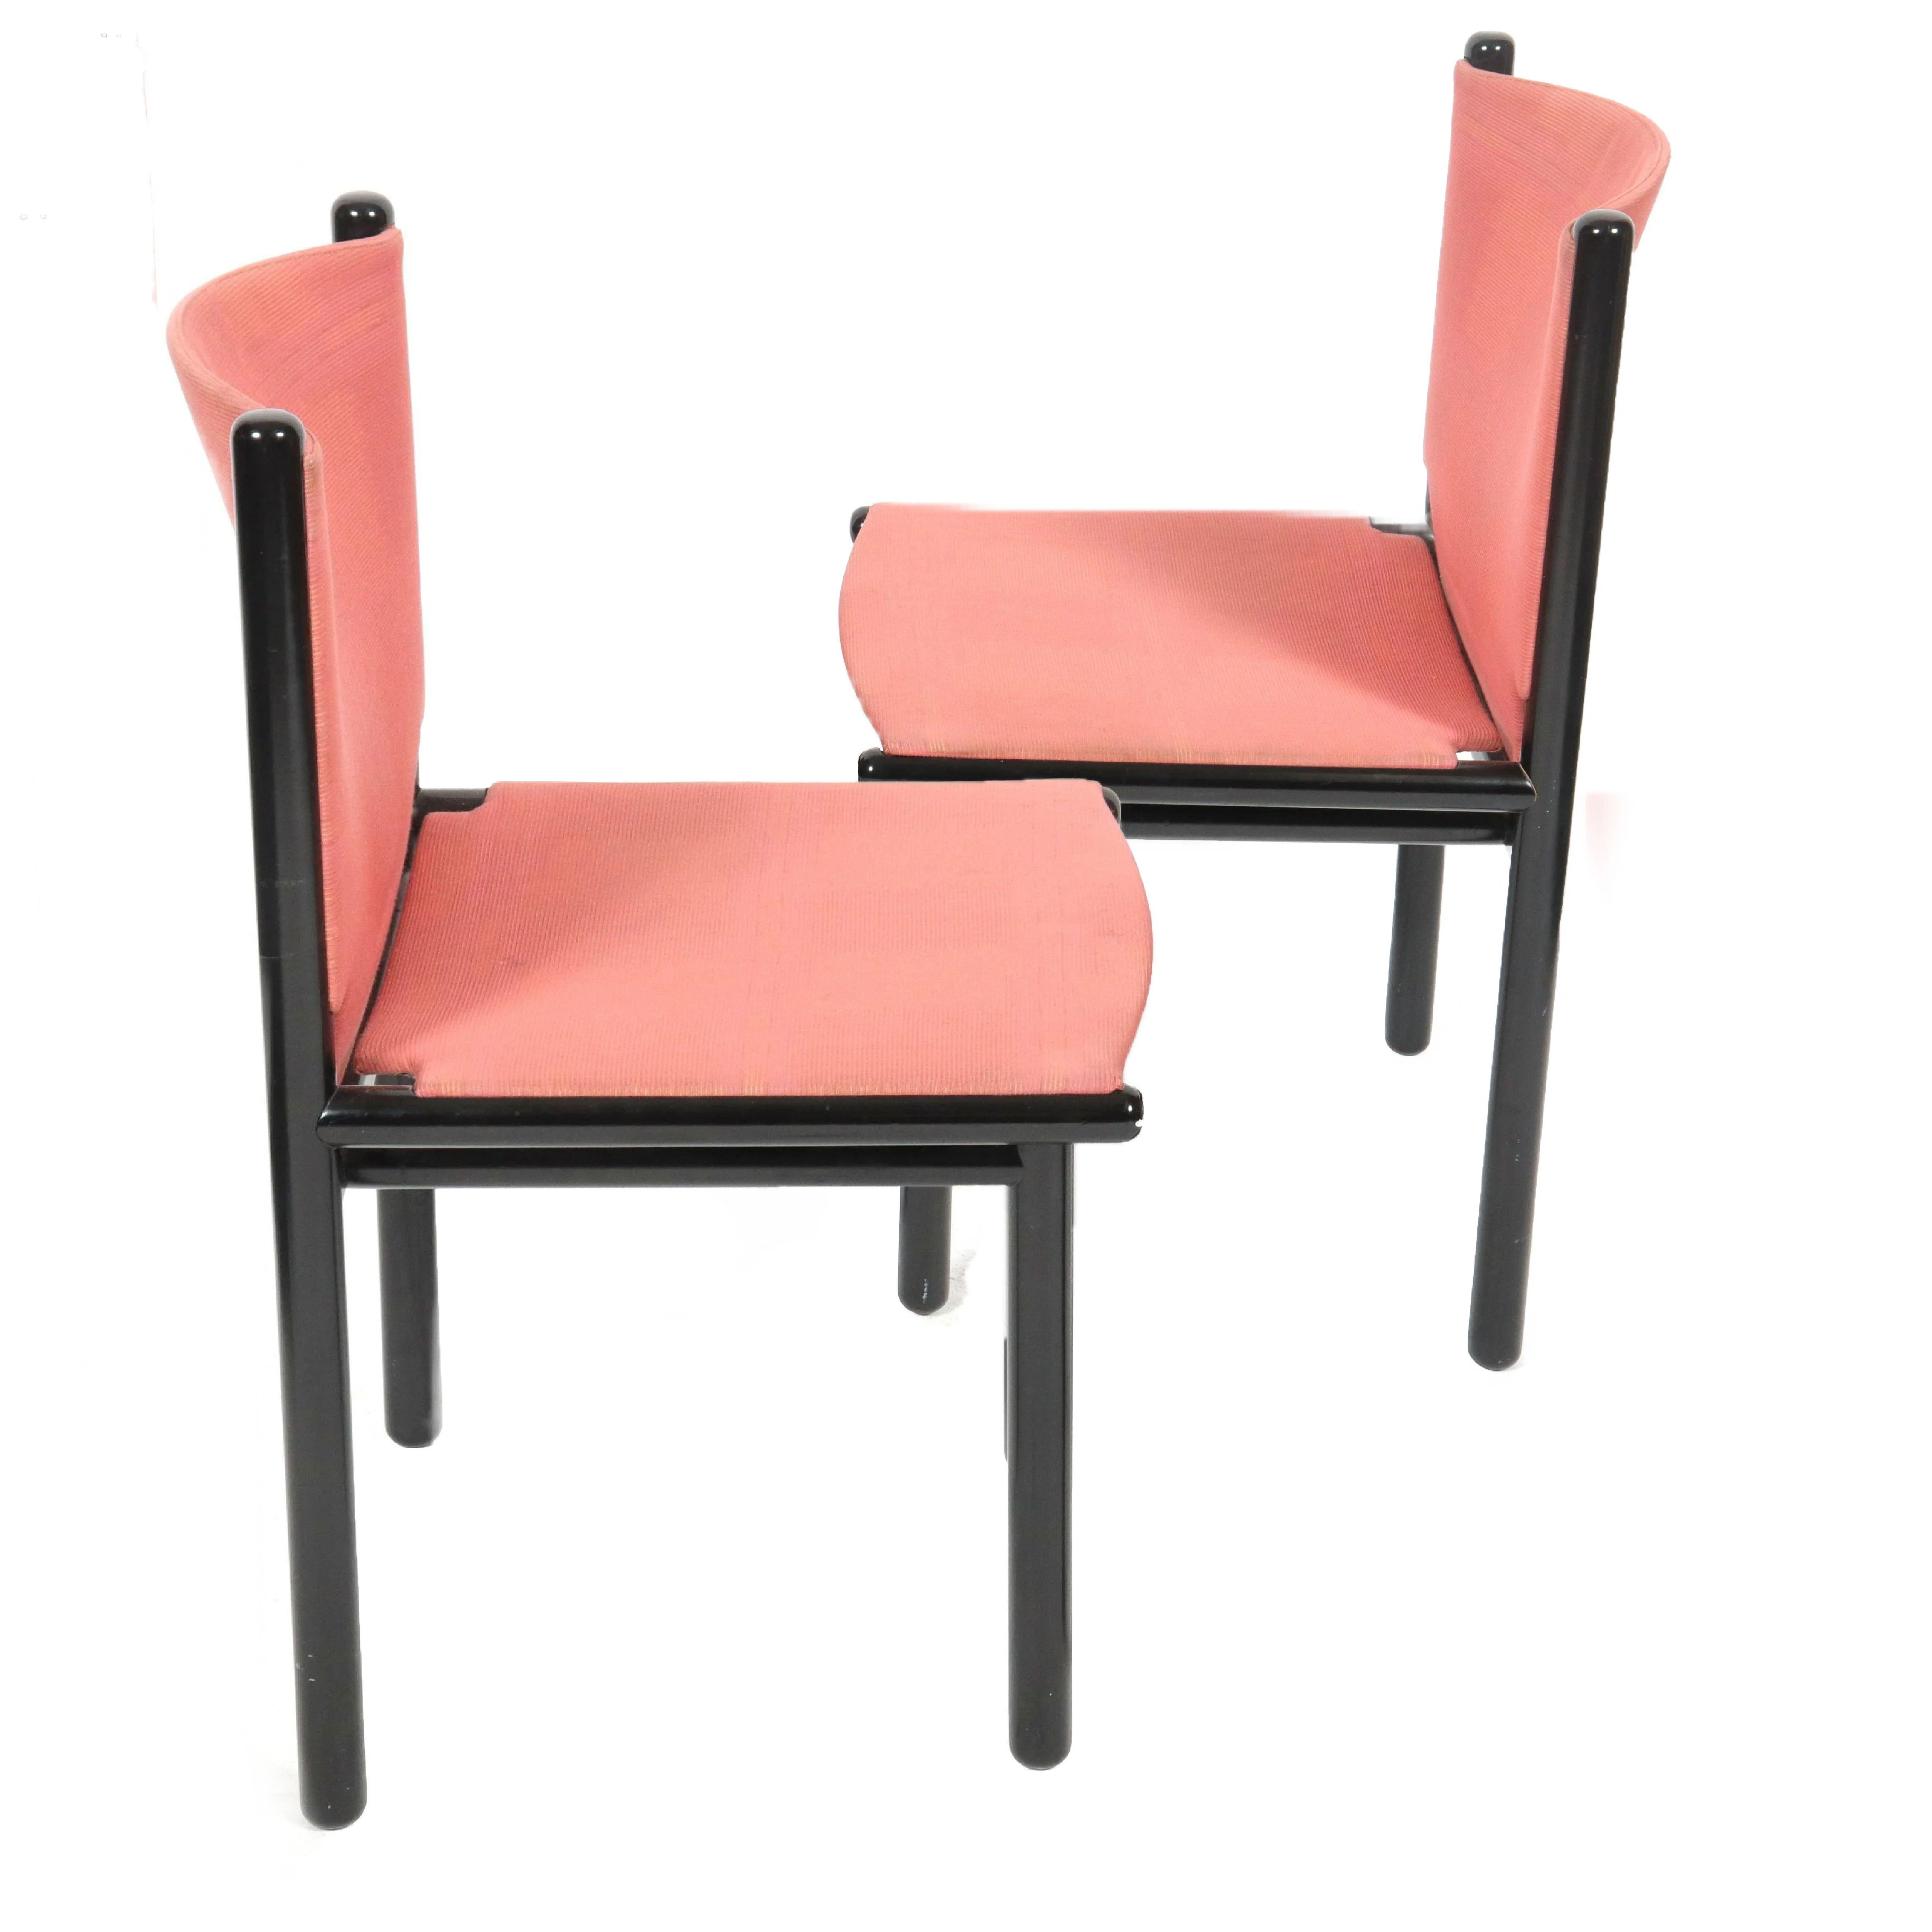 Modern Gianfranco Frattini for Cassina Dining Chair, Black Lacquered Frame, Pink, 1985 For Sale